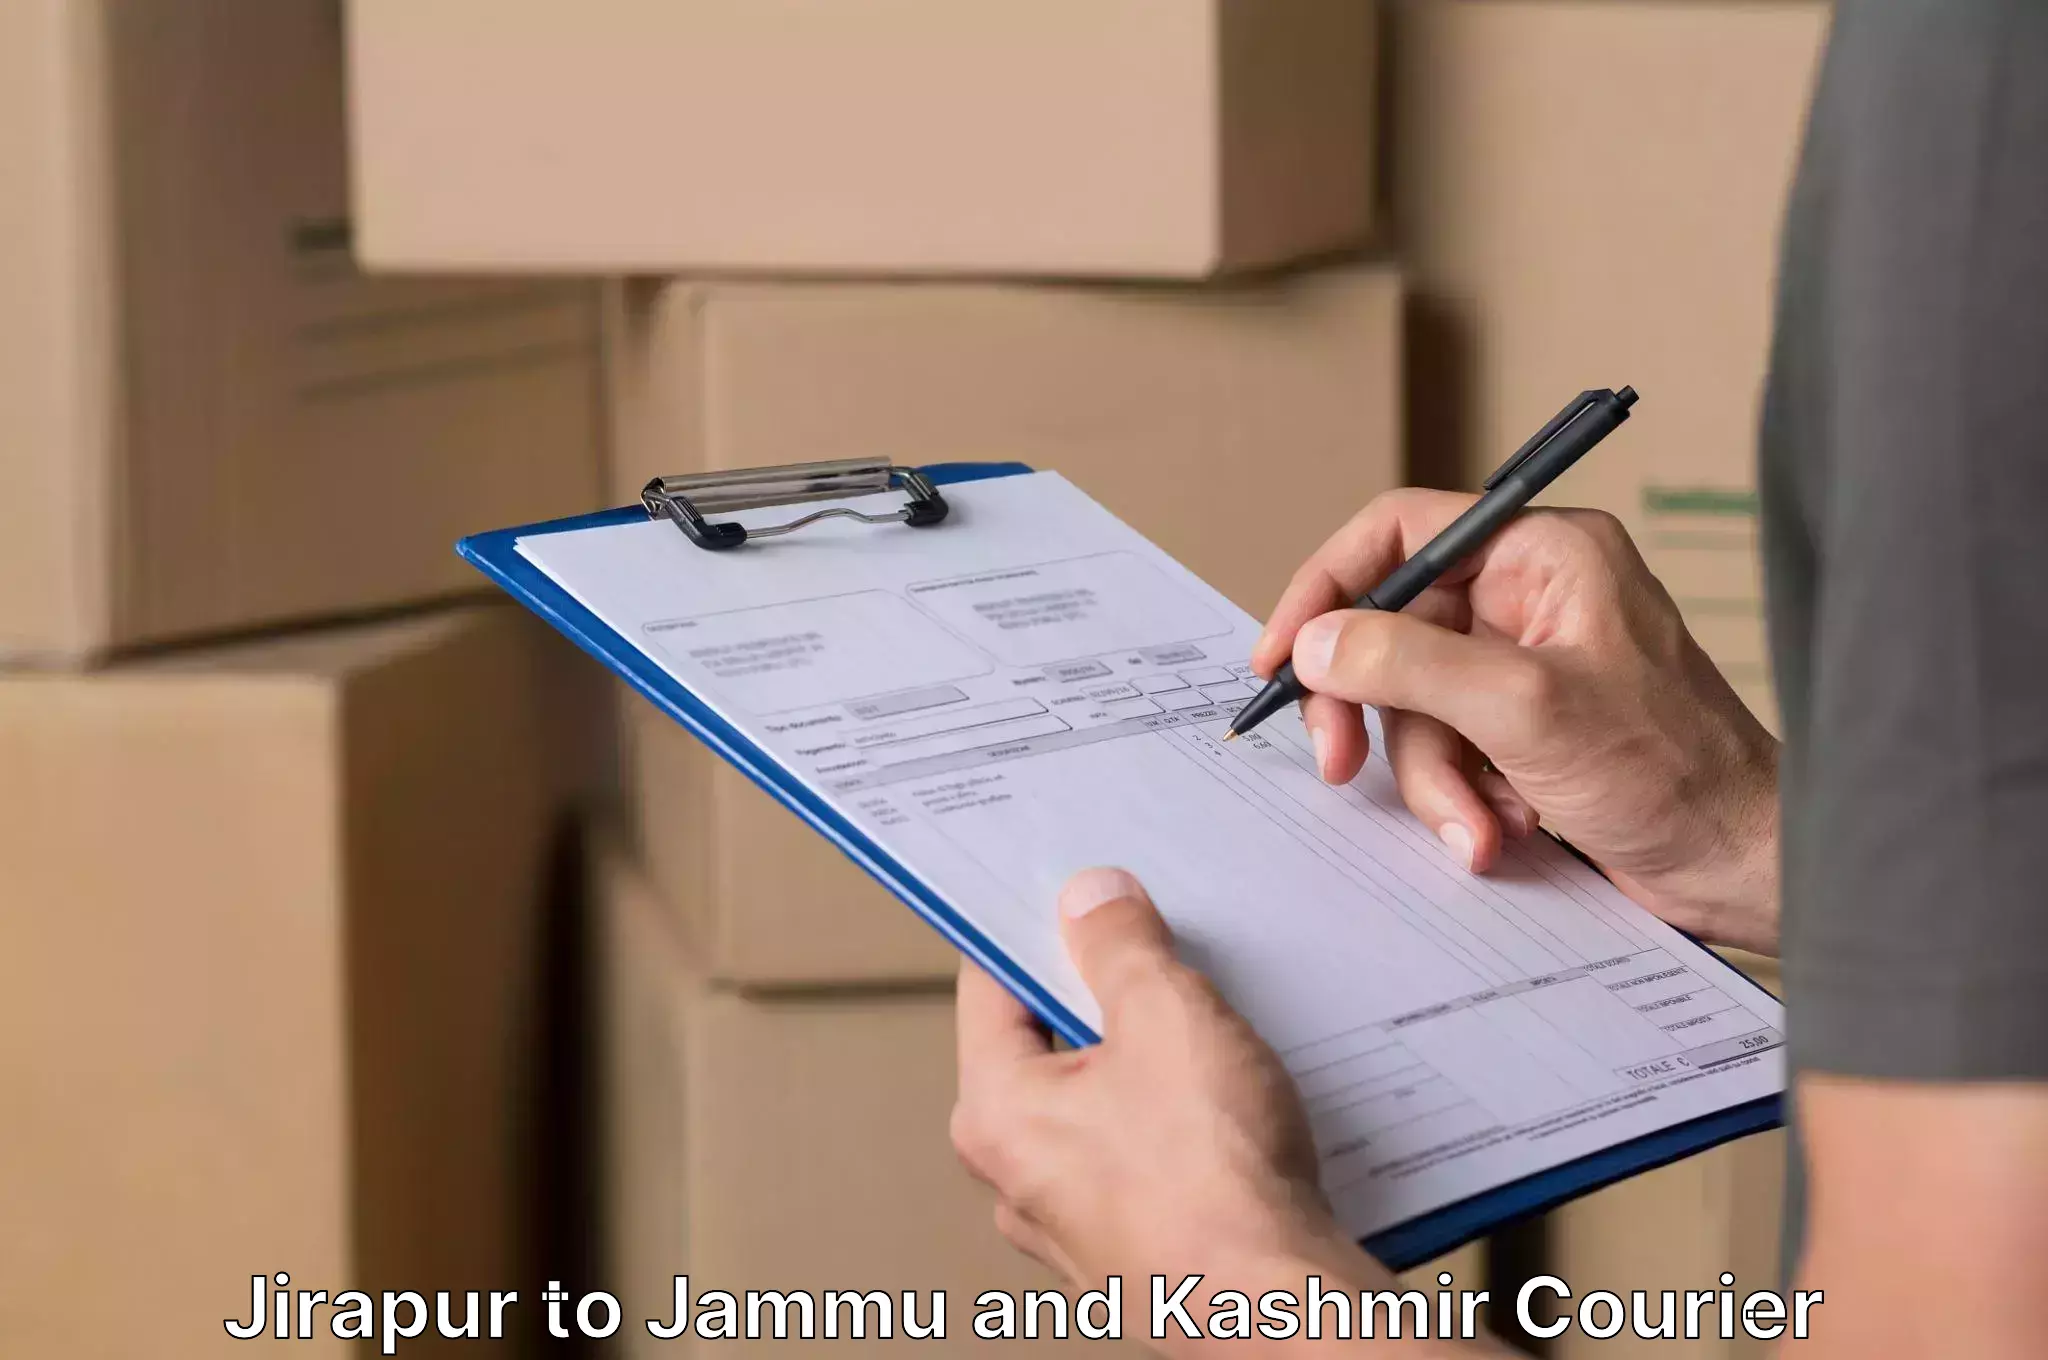 Home relocation experts Jirapur to IIT Jammu